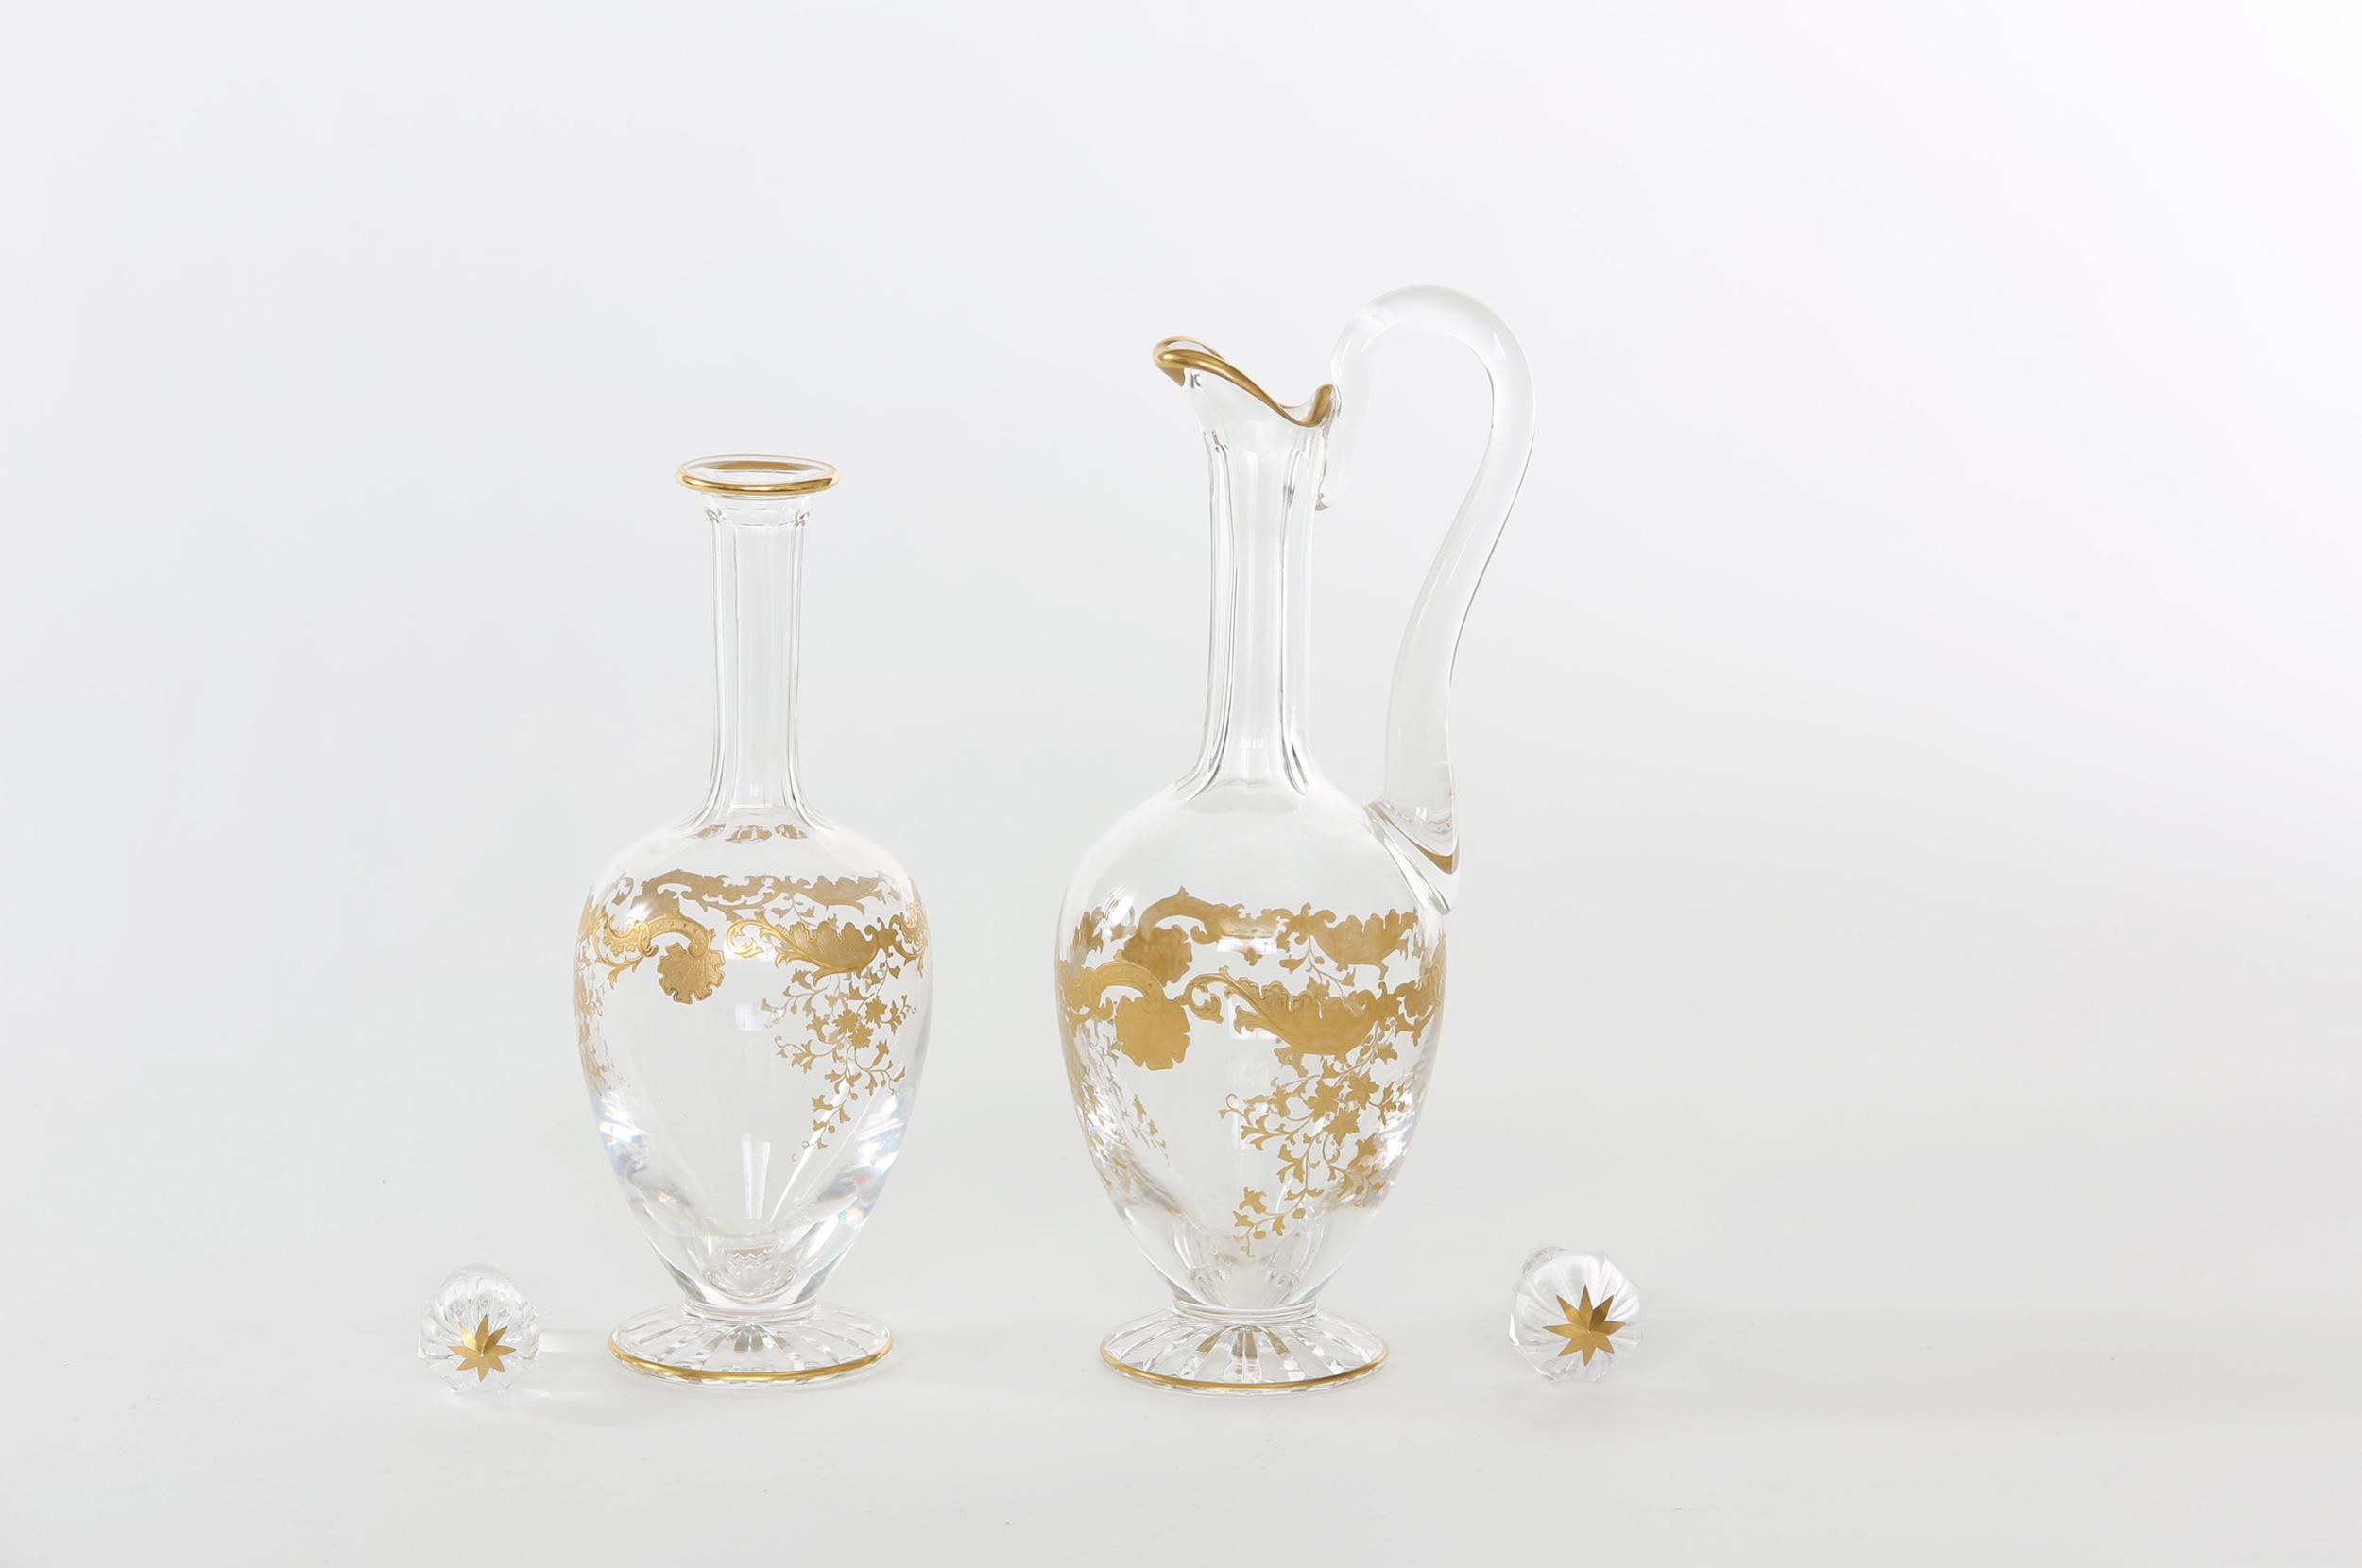 Mid-20th century pair Saint Louis crystal / gold design details tableware / barware jugs decanters. Each one is in great condition. Maker's mark stamped undersigned. The one with the handle stands about 15 inches tall x 5 inches diameter and 13